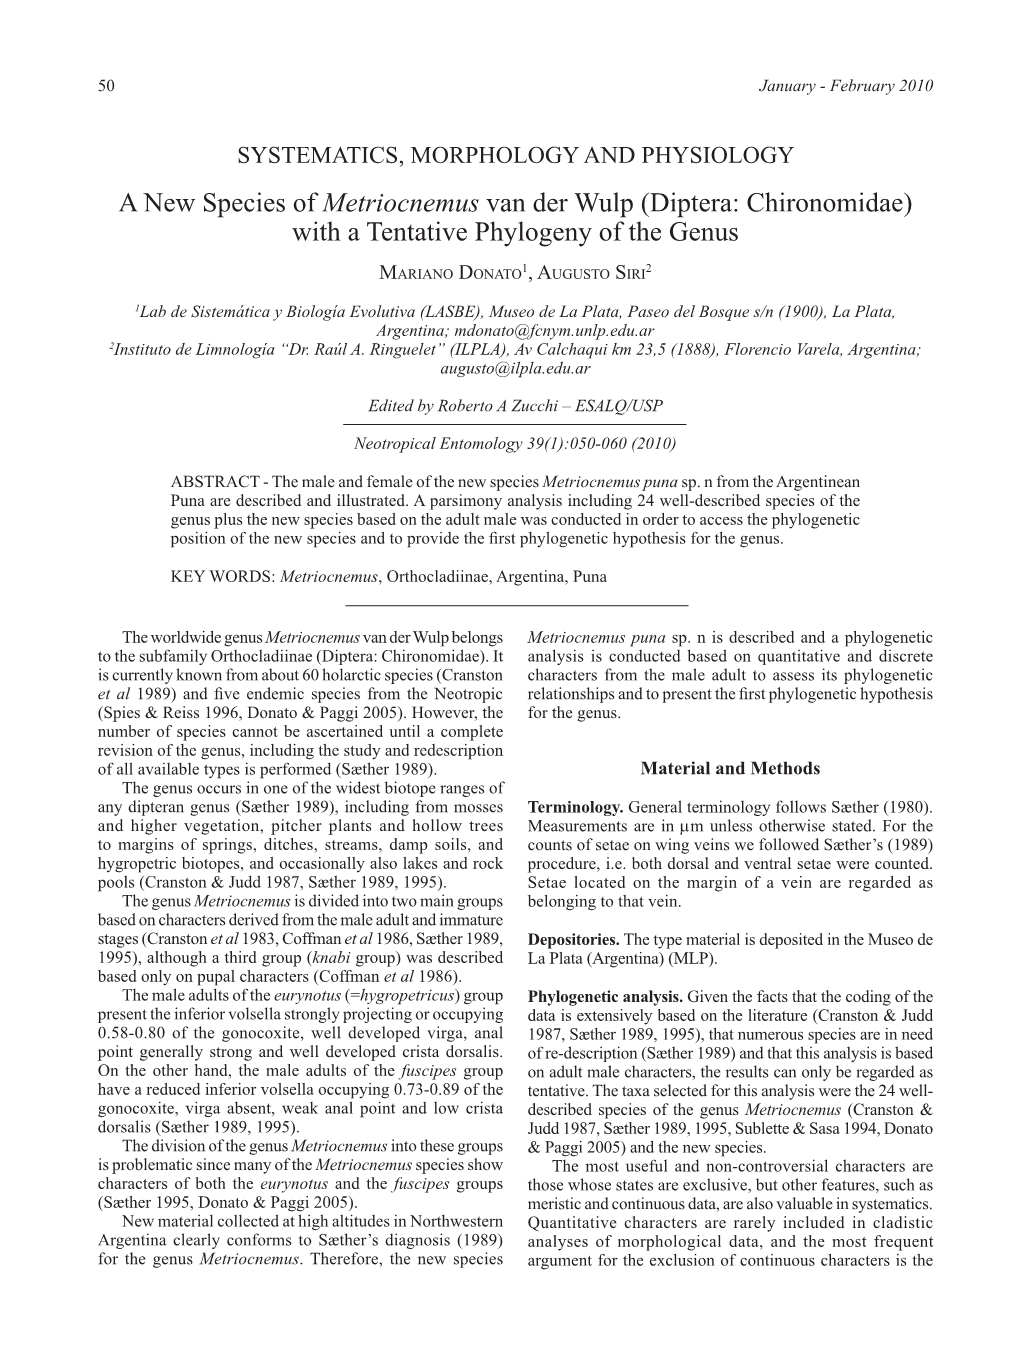 Diptera: Chironomidae) with a Tentative Phylogeny of the Genus